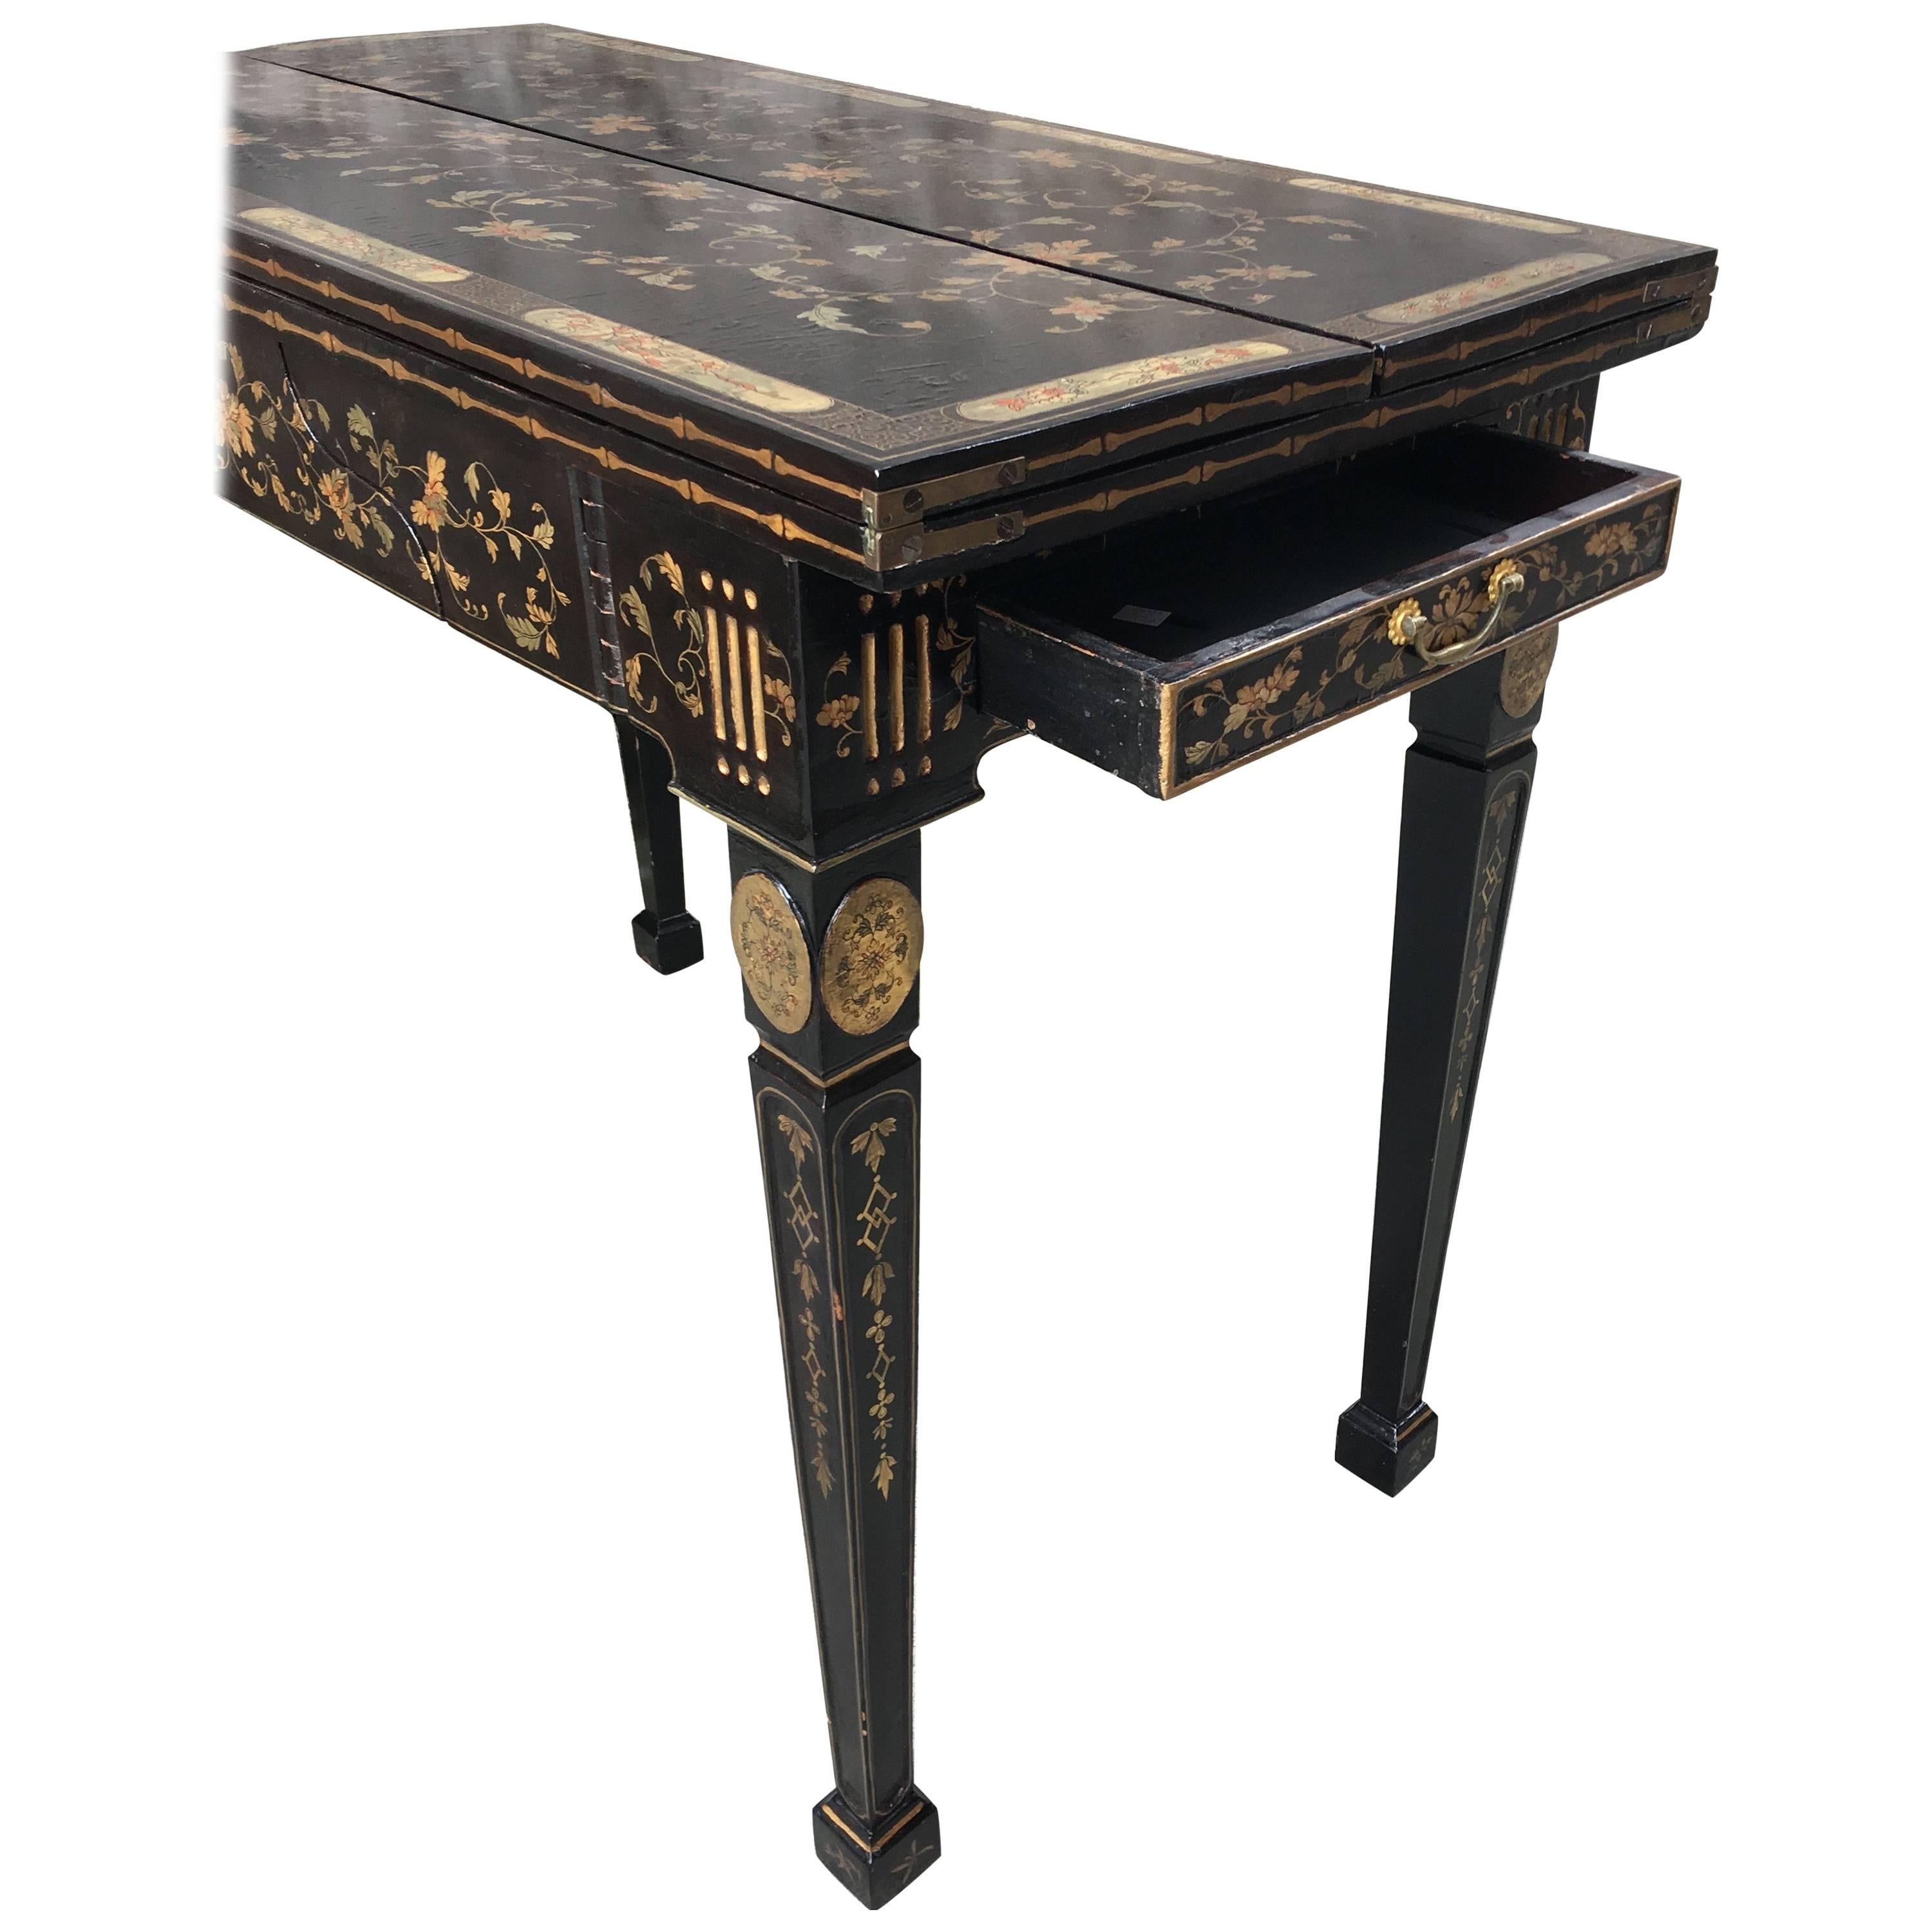 Chinese Export Chinoiserie Games Table early 19th century